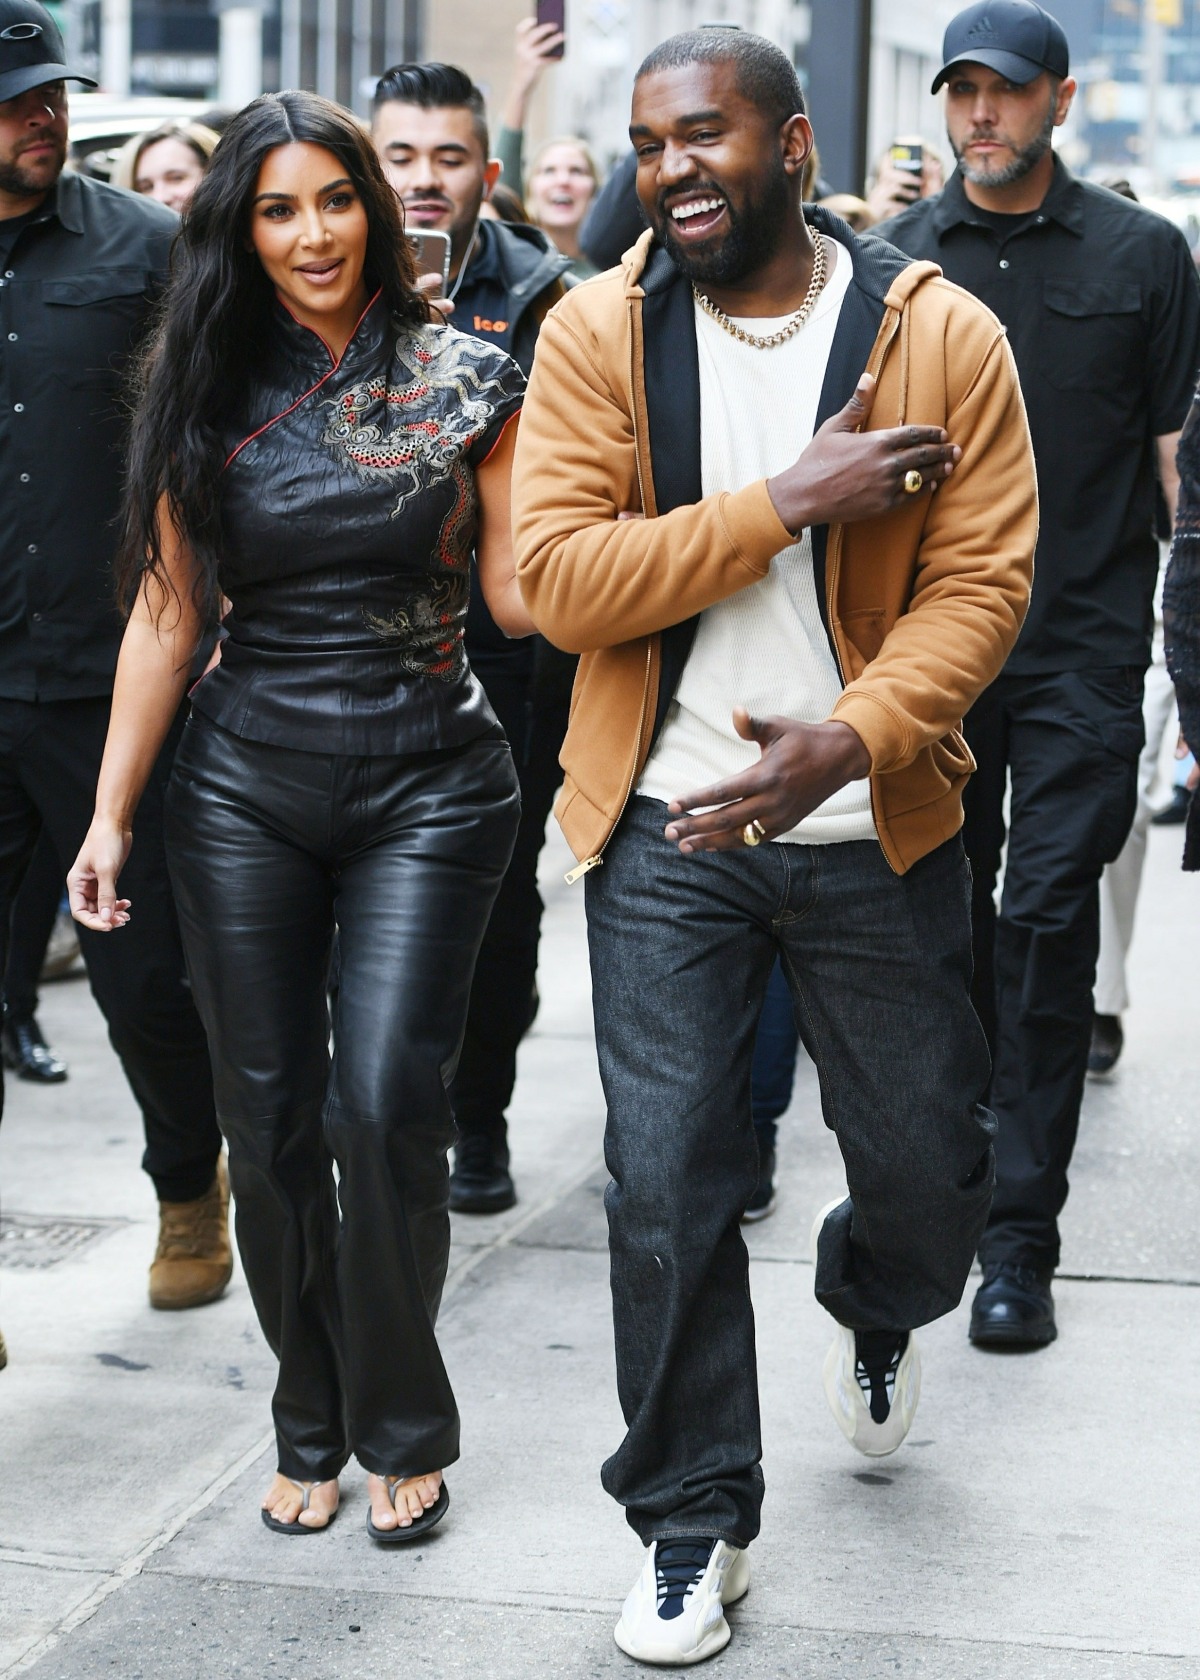 Kim Kardashian and Kanye West cause a frenzy in Midtown as they head to a souvenir shop in New York